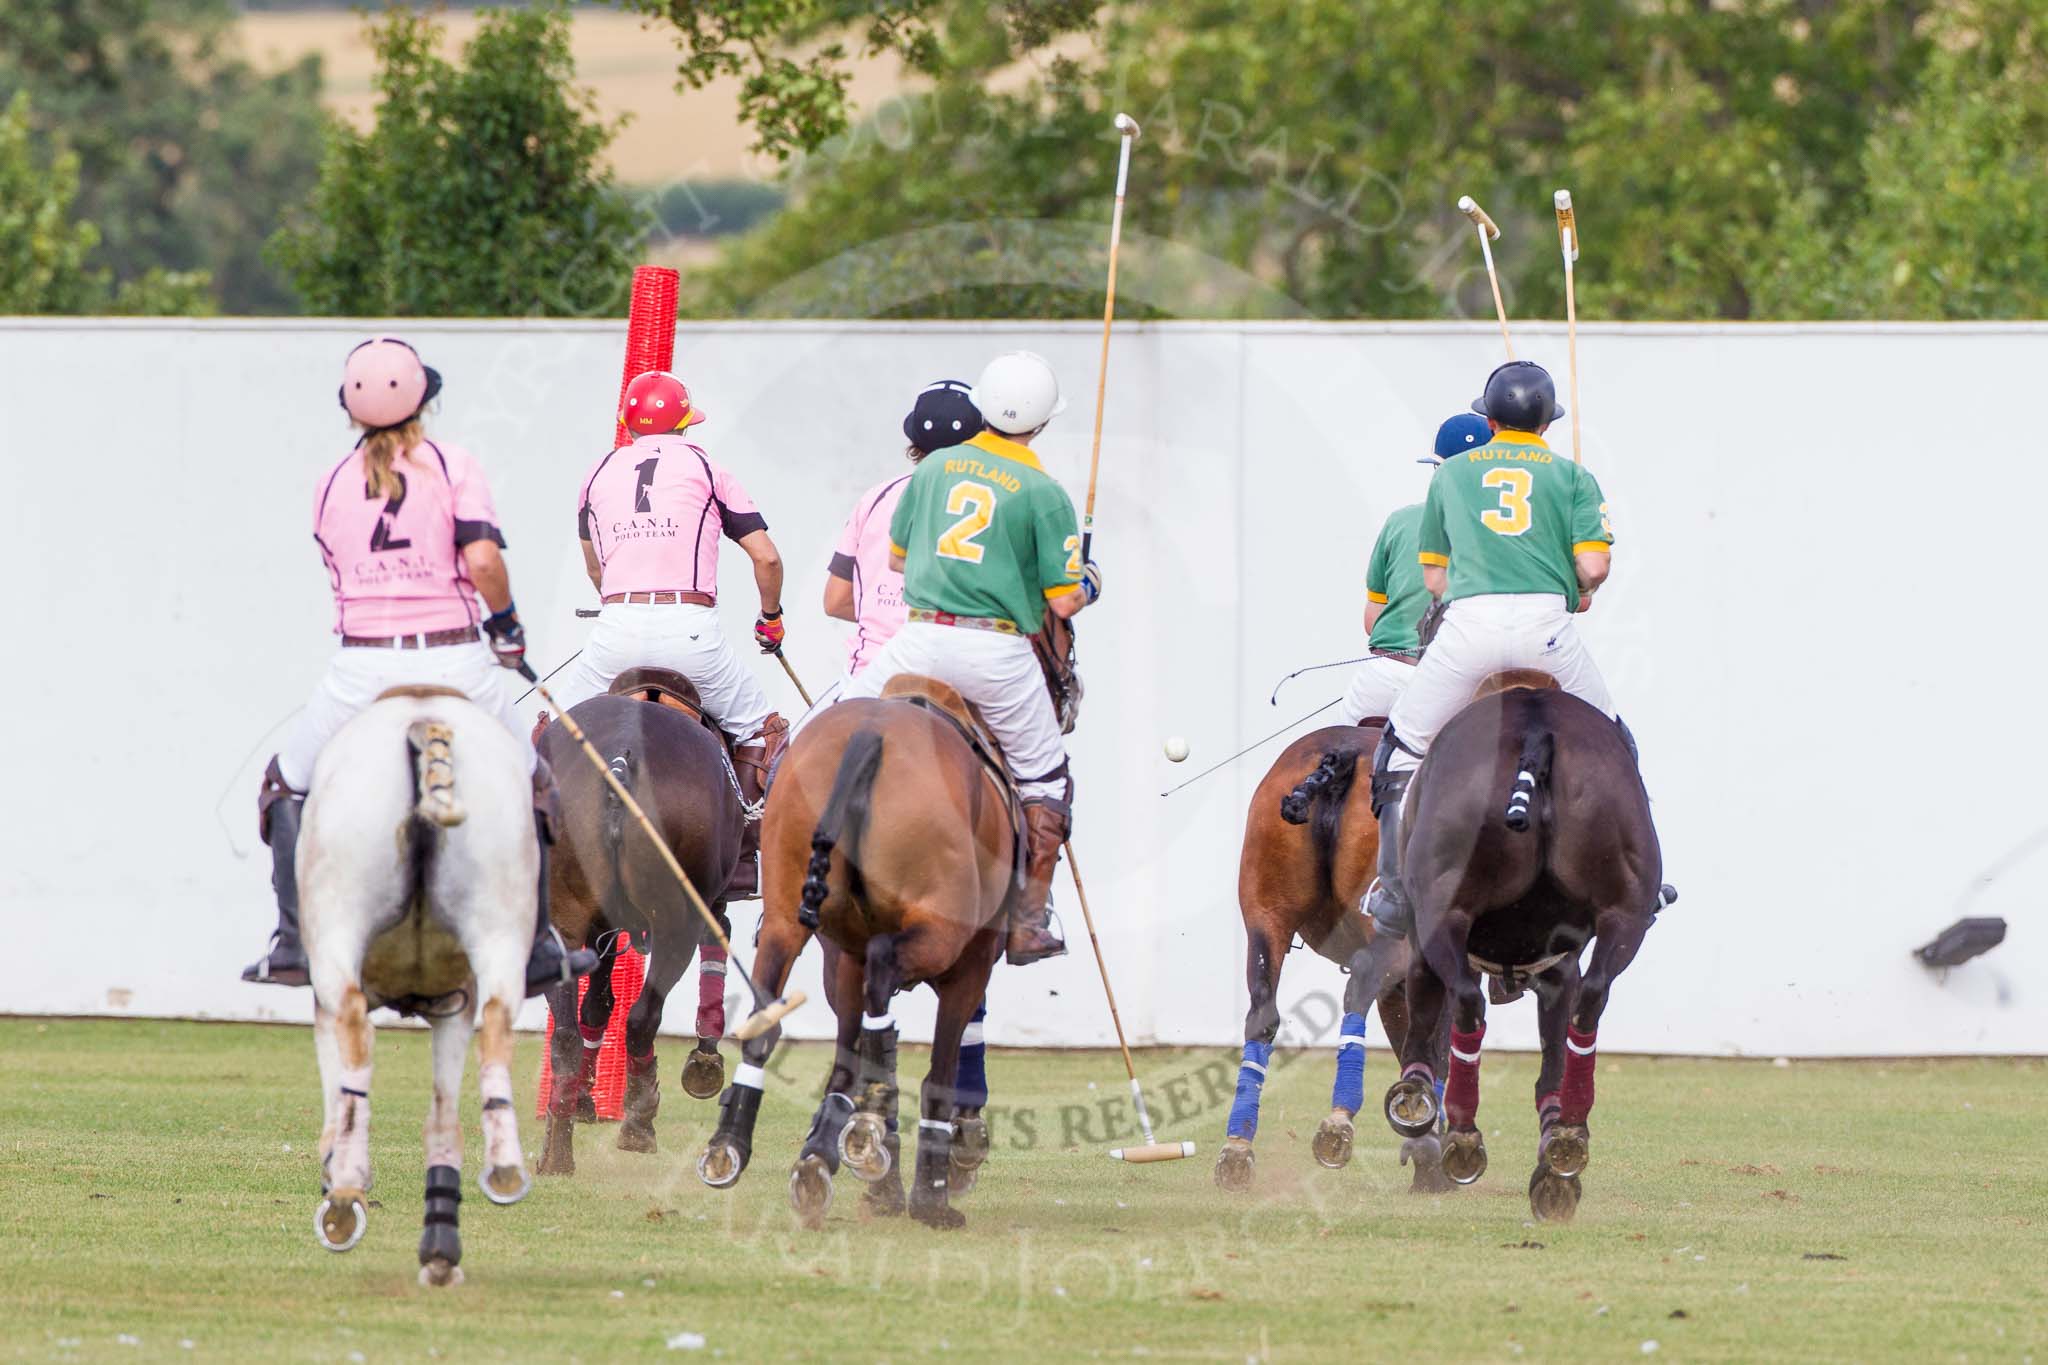 DBPC Polo in the Park 2013, Final of the Tusk Trophy (4 Goals), Rutland vs C.A.N.I..
Dallas Burston Polo Club, ,
Southam,
Warwickshire,
United Kingdom,
on 01 September 2013 at 16:27, image #570